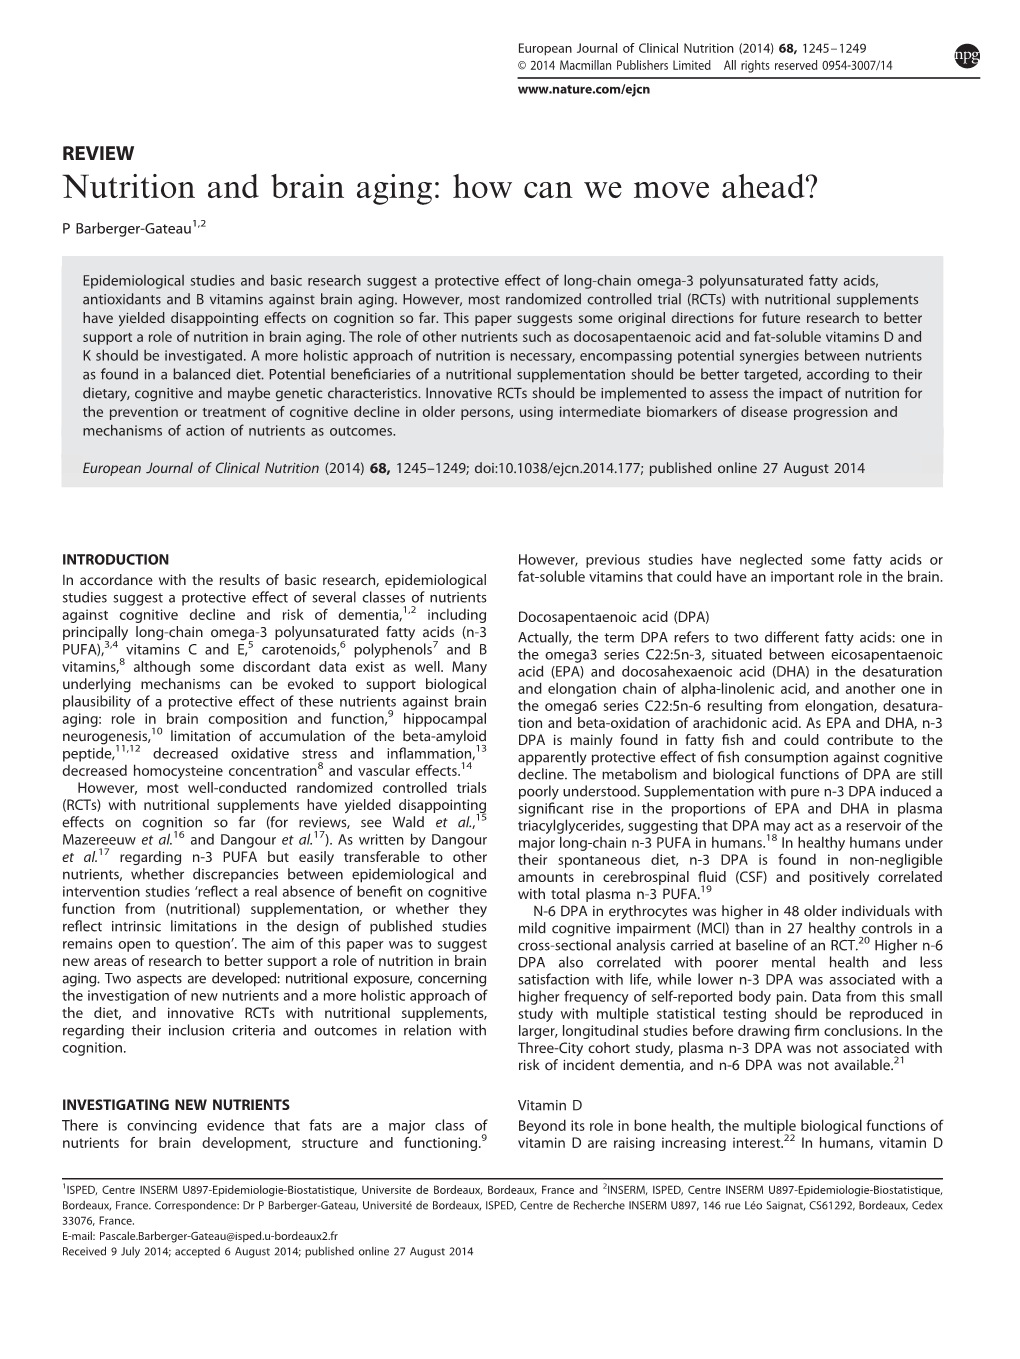 Nutrition and Brain Aging: How Can We Move Ahead&Quest;